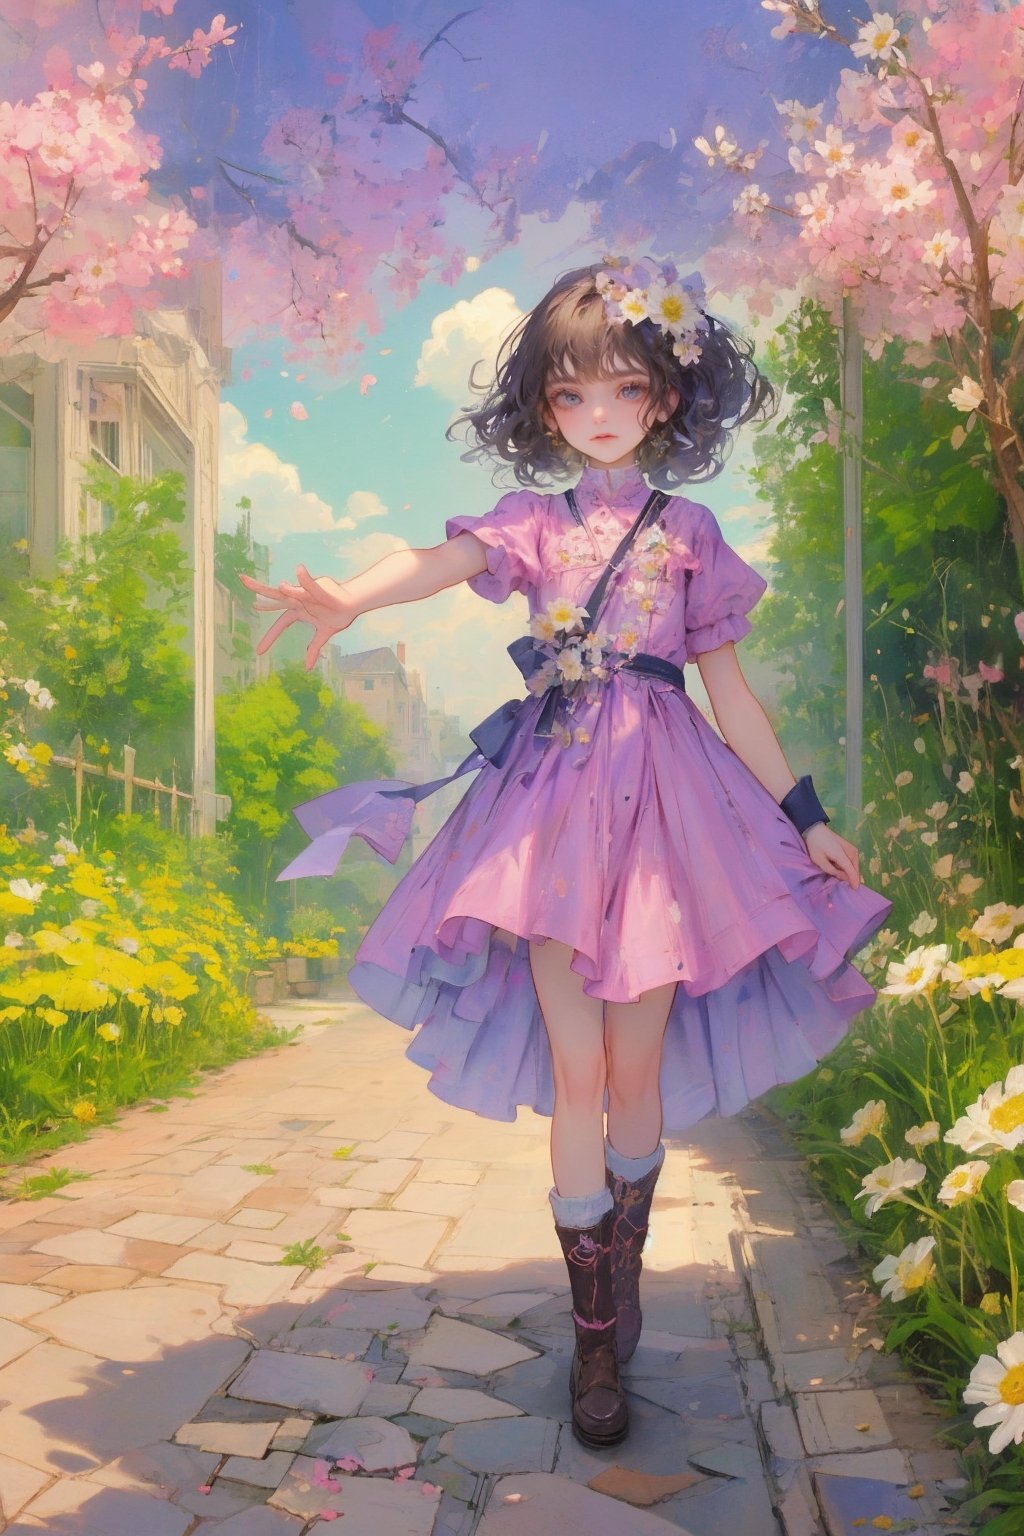 a noble little girl wearing a pink dress and a daisy tiptoes towards a boy with curly hair, reaching out a delicate rose in a thornless stem, standing on cobblestone pavement, under a cloudless sky, with a row of blooming cherry blossom trees in the background, captured with a Canon EOS 5D Mark IV camera, 50mm lens, medium shot focusing on the girl’s tender gesture, in a style reminiscent of a romantic oil painting by Thomas Kinkade. ,midjourney,Anitoon2